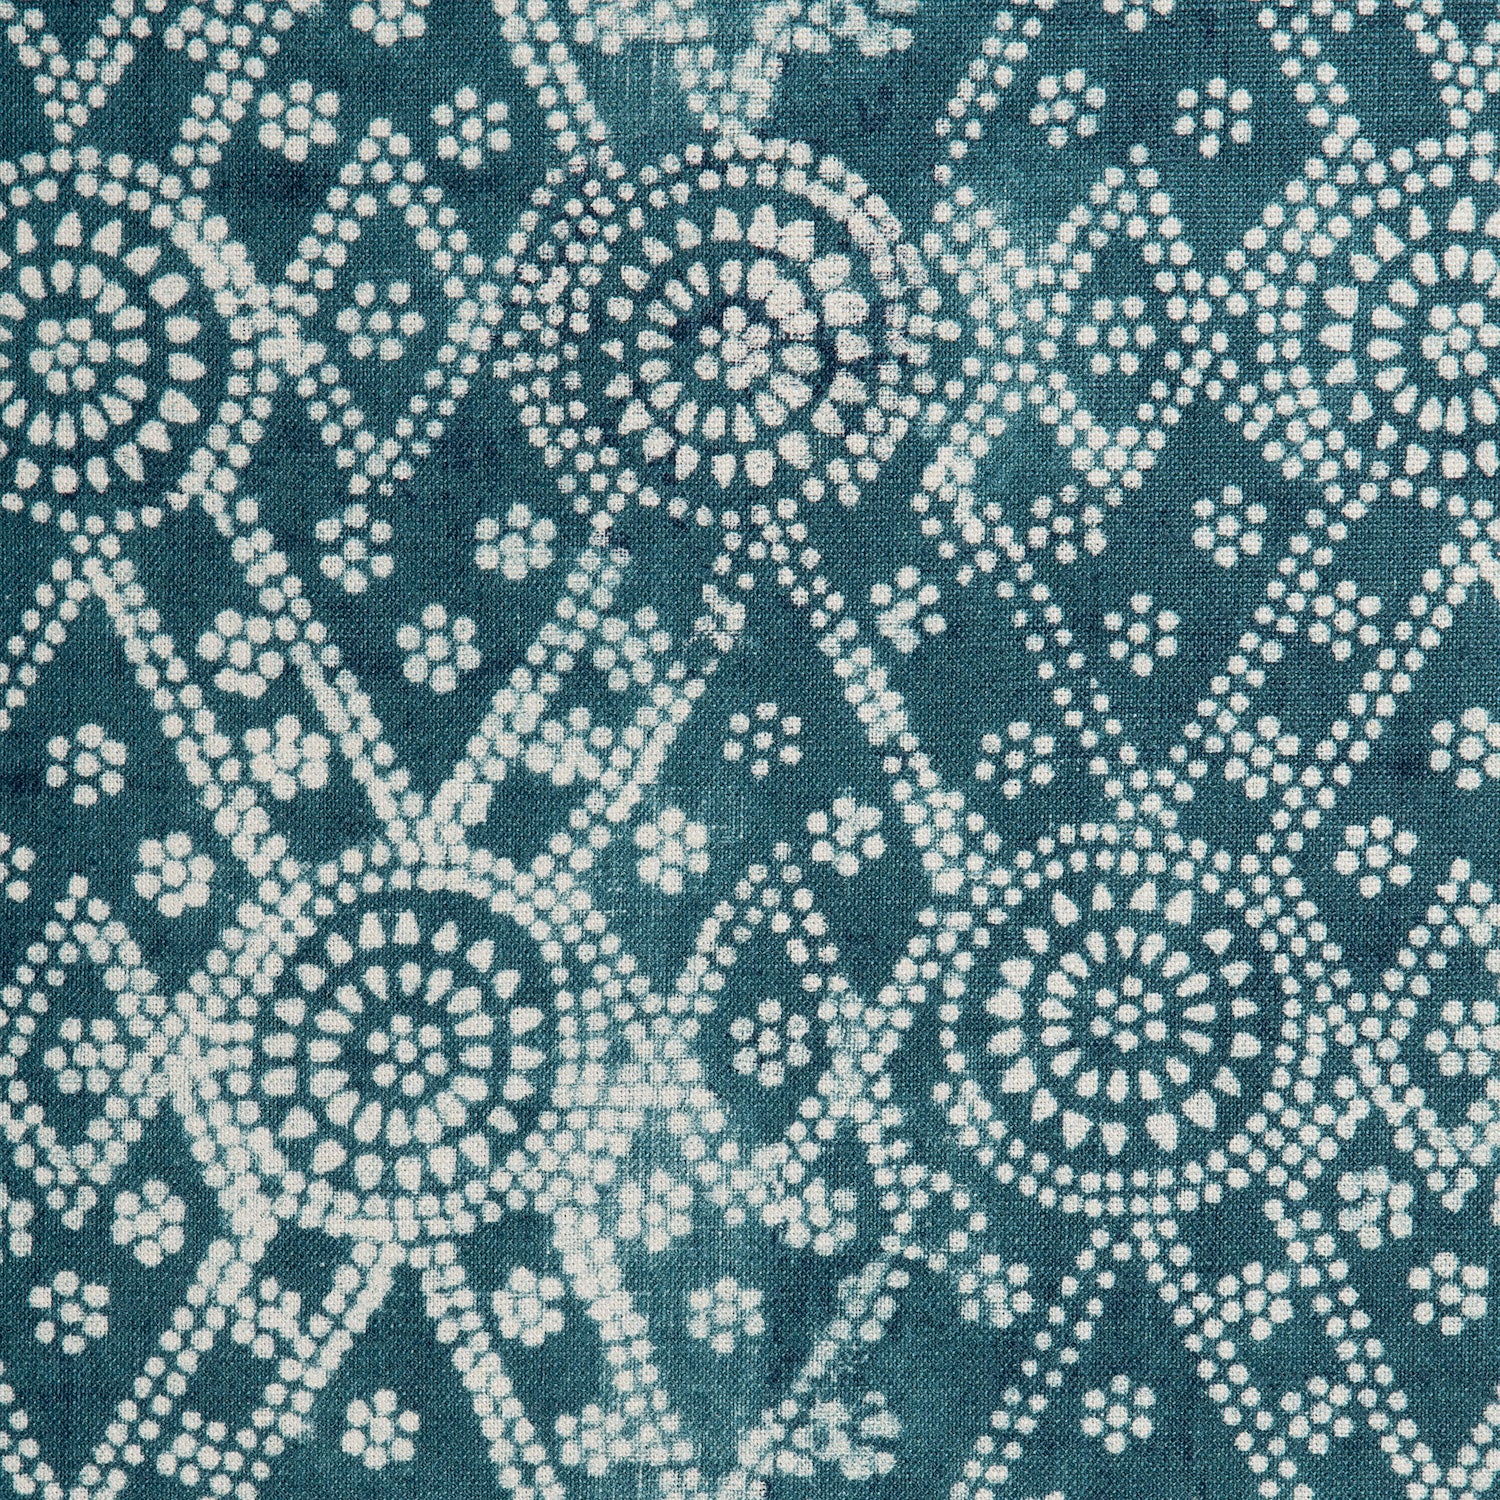 Detail of a linen fabric in a gridded dot pattern in white on a mottled indigo field.